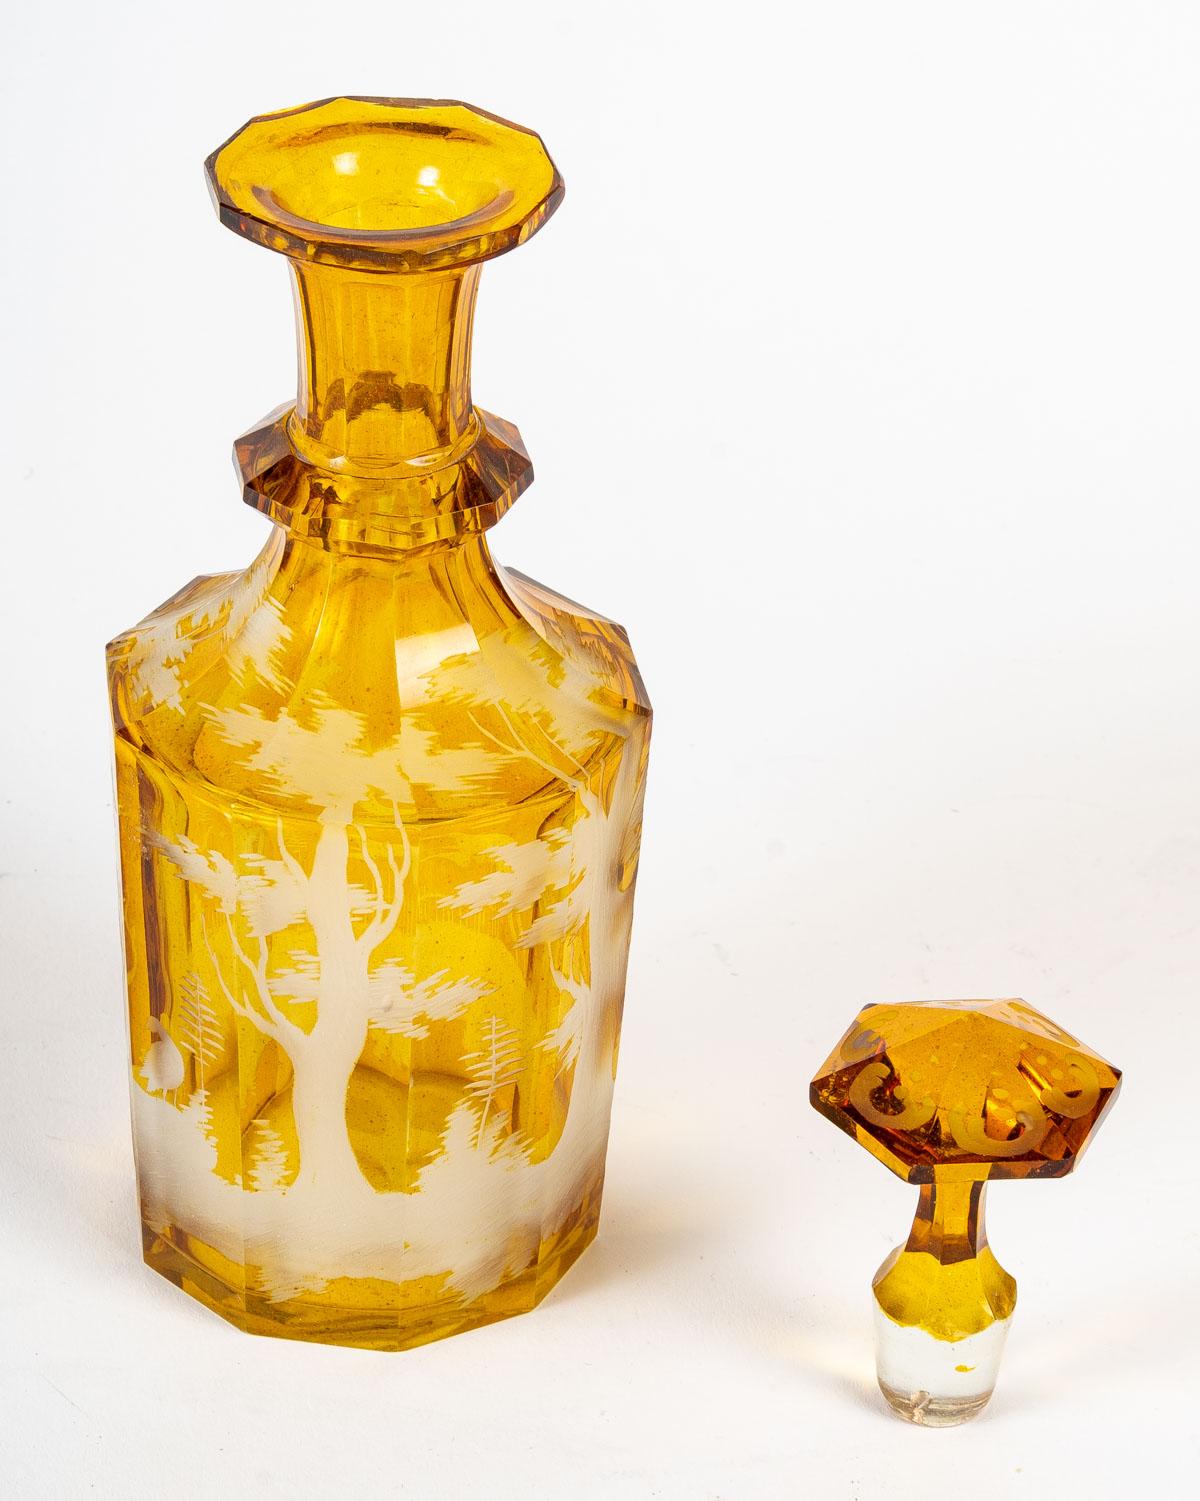 Yellow Bohemian crystal service set, 19th century.
Bohemian crystal service set with a tray, 6 glasses and a carafe, engraved with hunting scene. 19th century.
Measures: H: 21 cm, W: 38 cm, D: 23 cm
3047